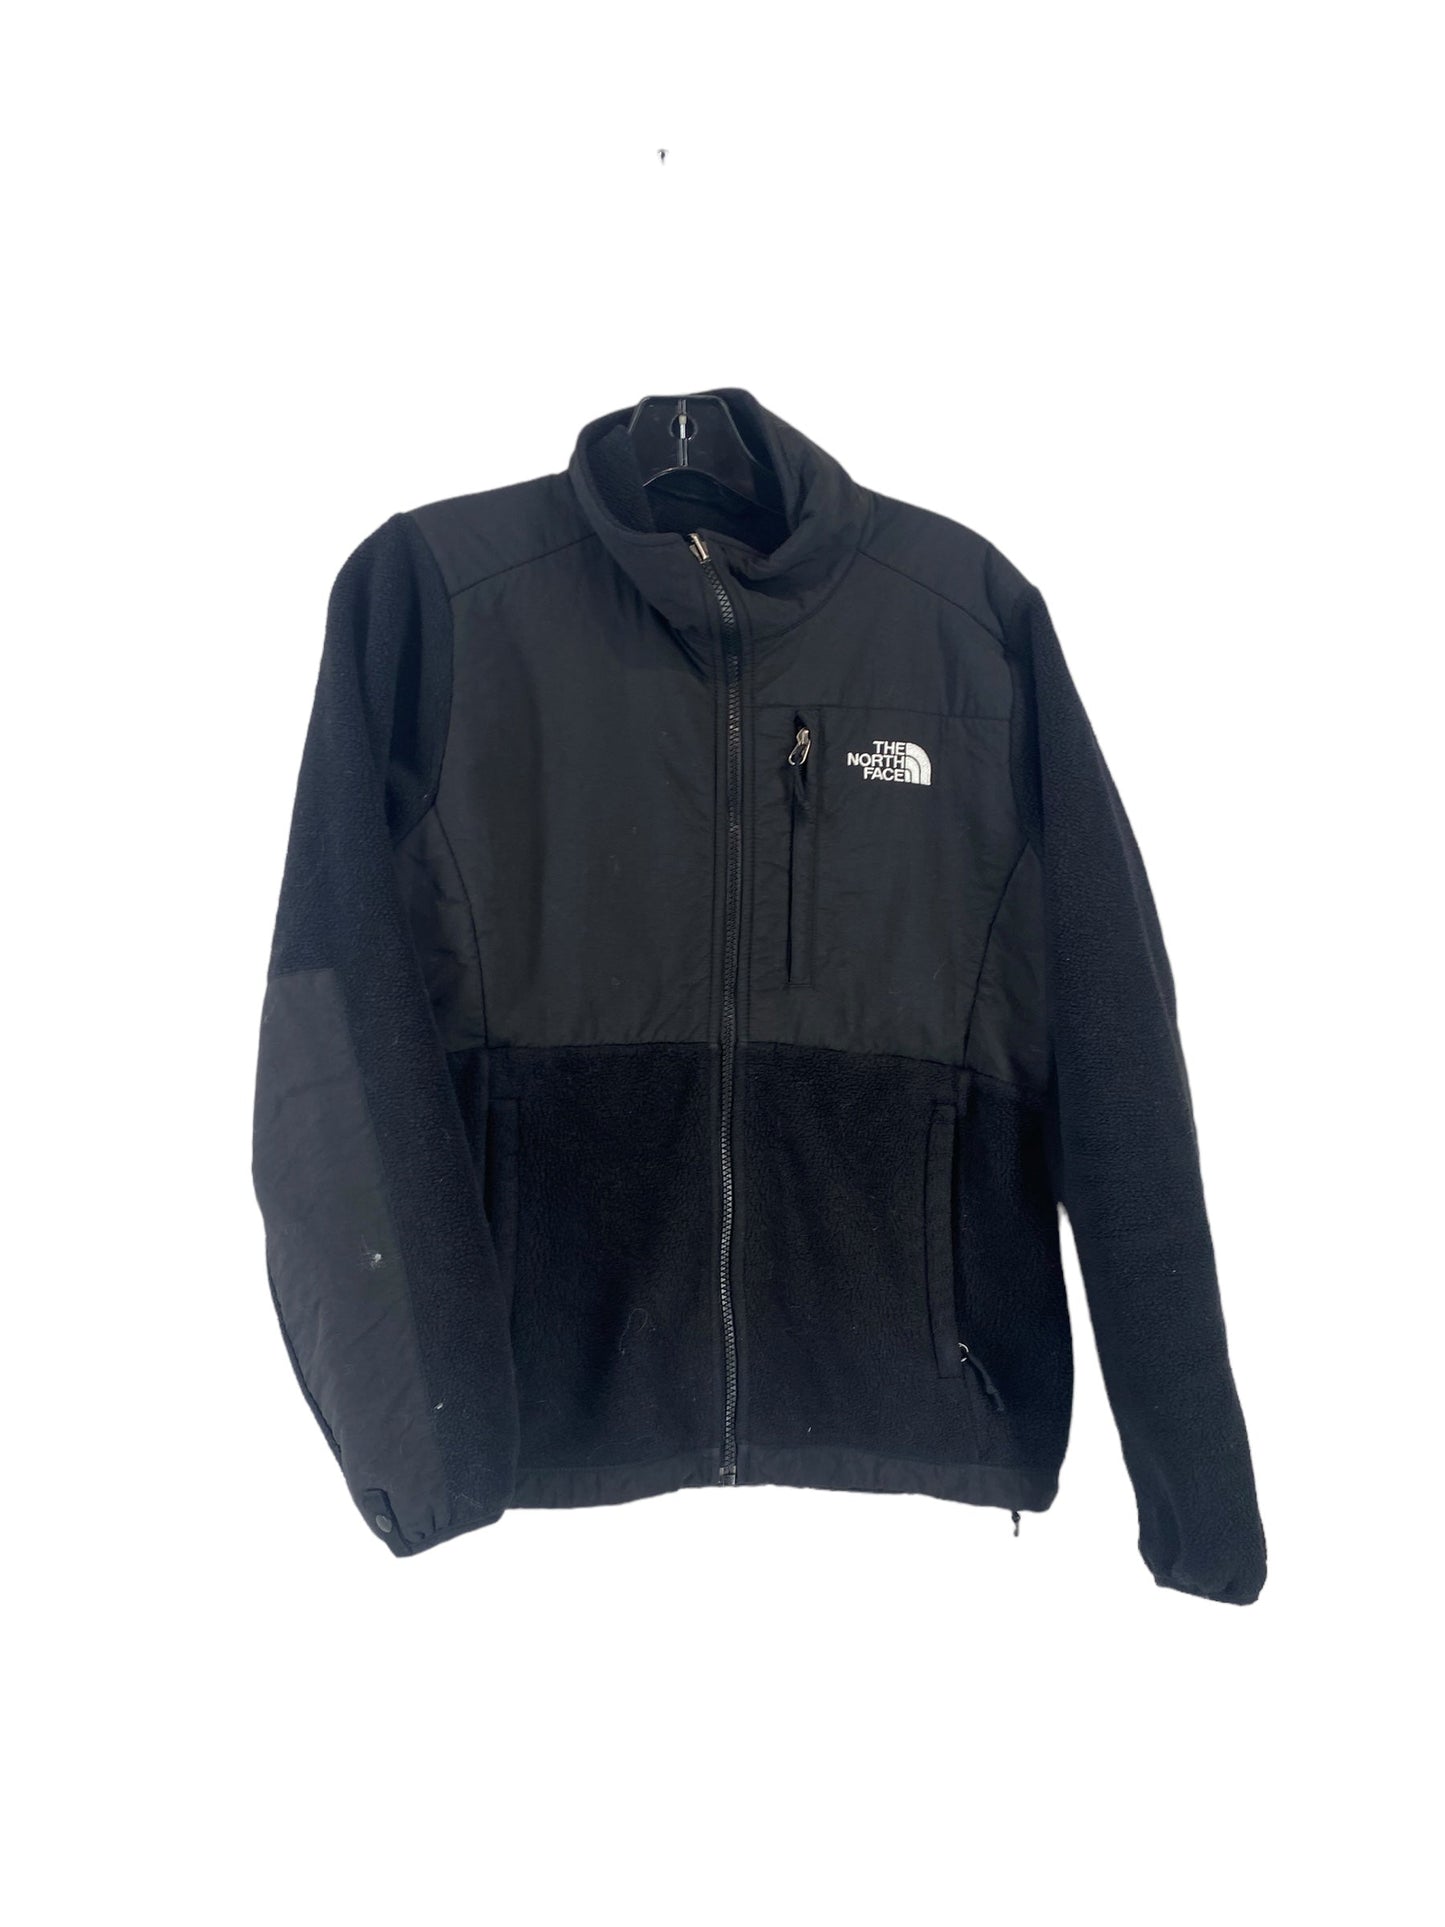 Black Athletic Jacket The North Face, Size S